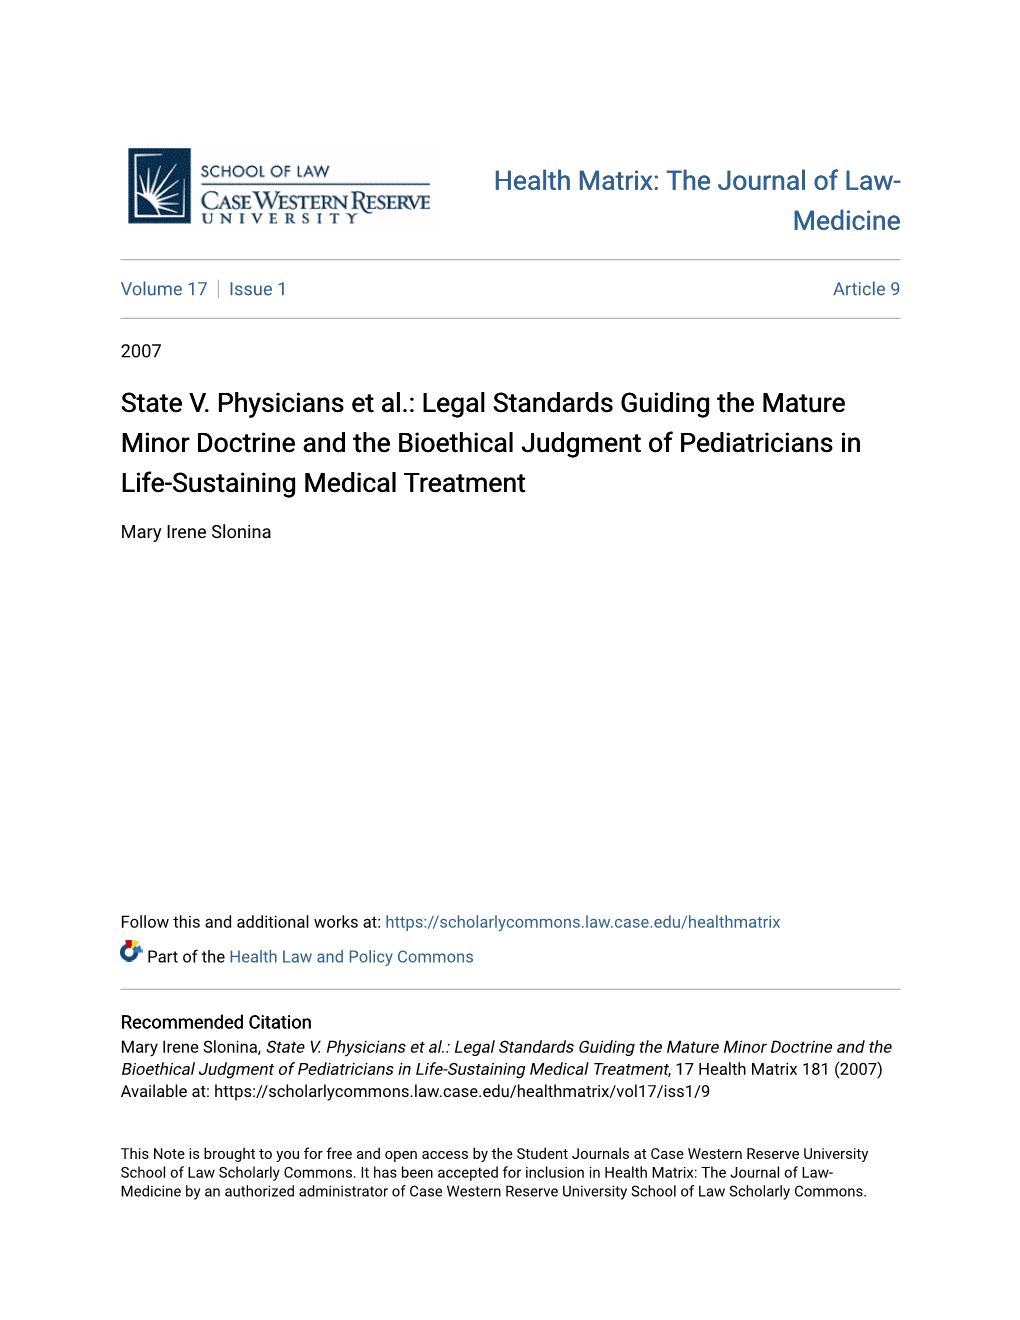 State V. Physicians Et Al.: Legal Standards Guiding the Mature Minor Doctrine and the Bioethical Judgment of Pediatricians in Life-Sustaining Medical Treatment